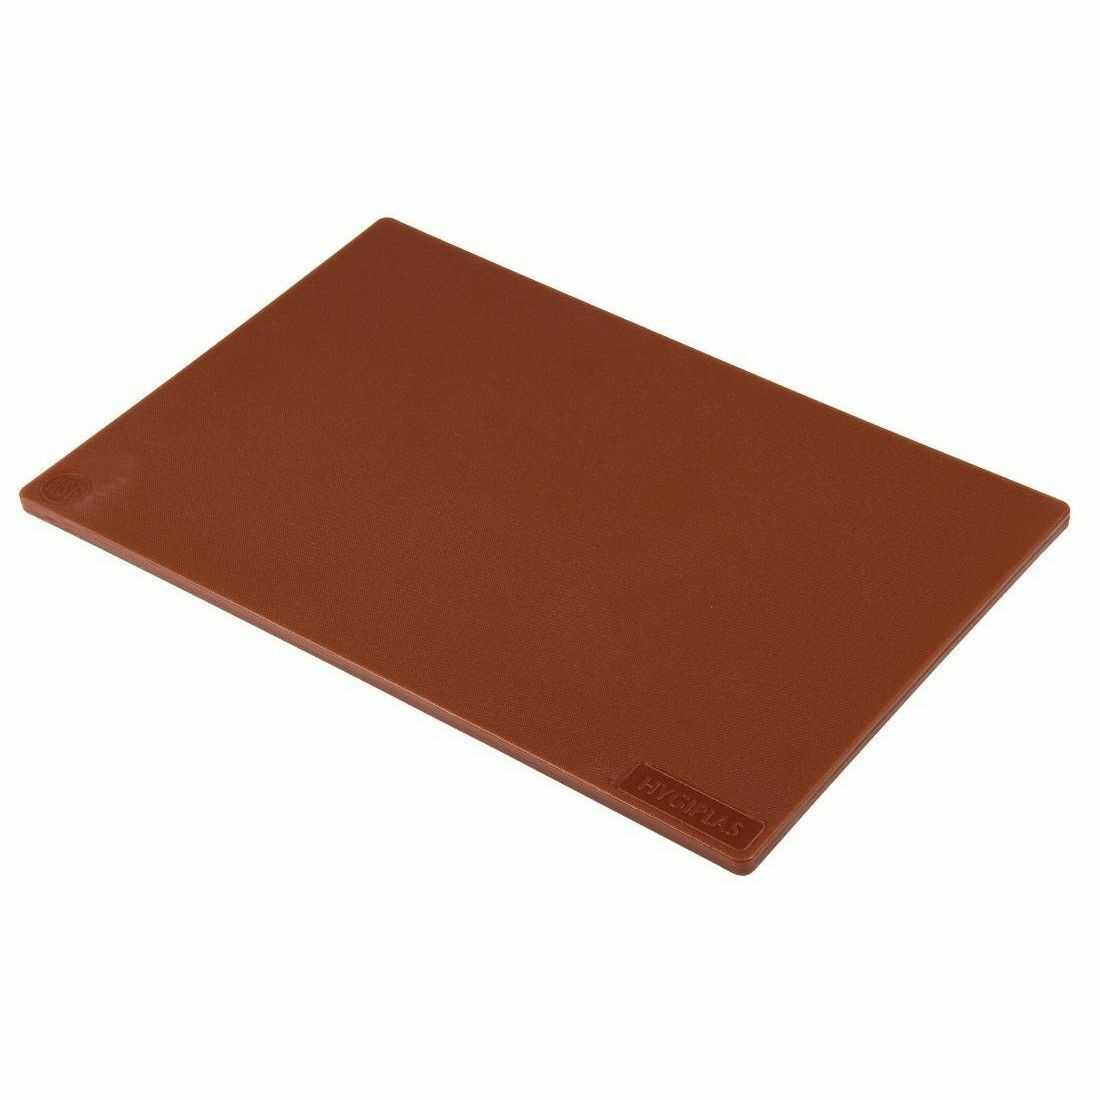 Brown Commercial Kitchen Chopping Board Colour Coded Hygiene Catering Food Cutting Set